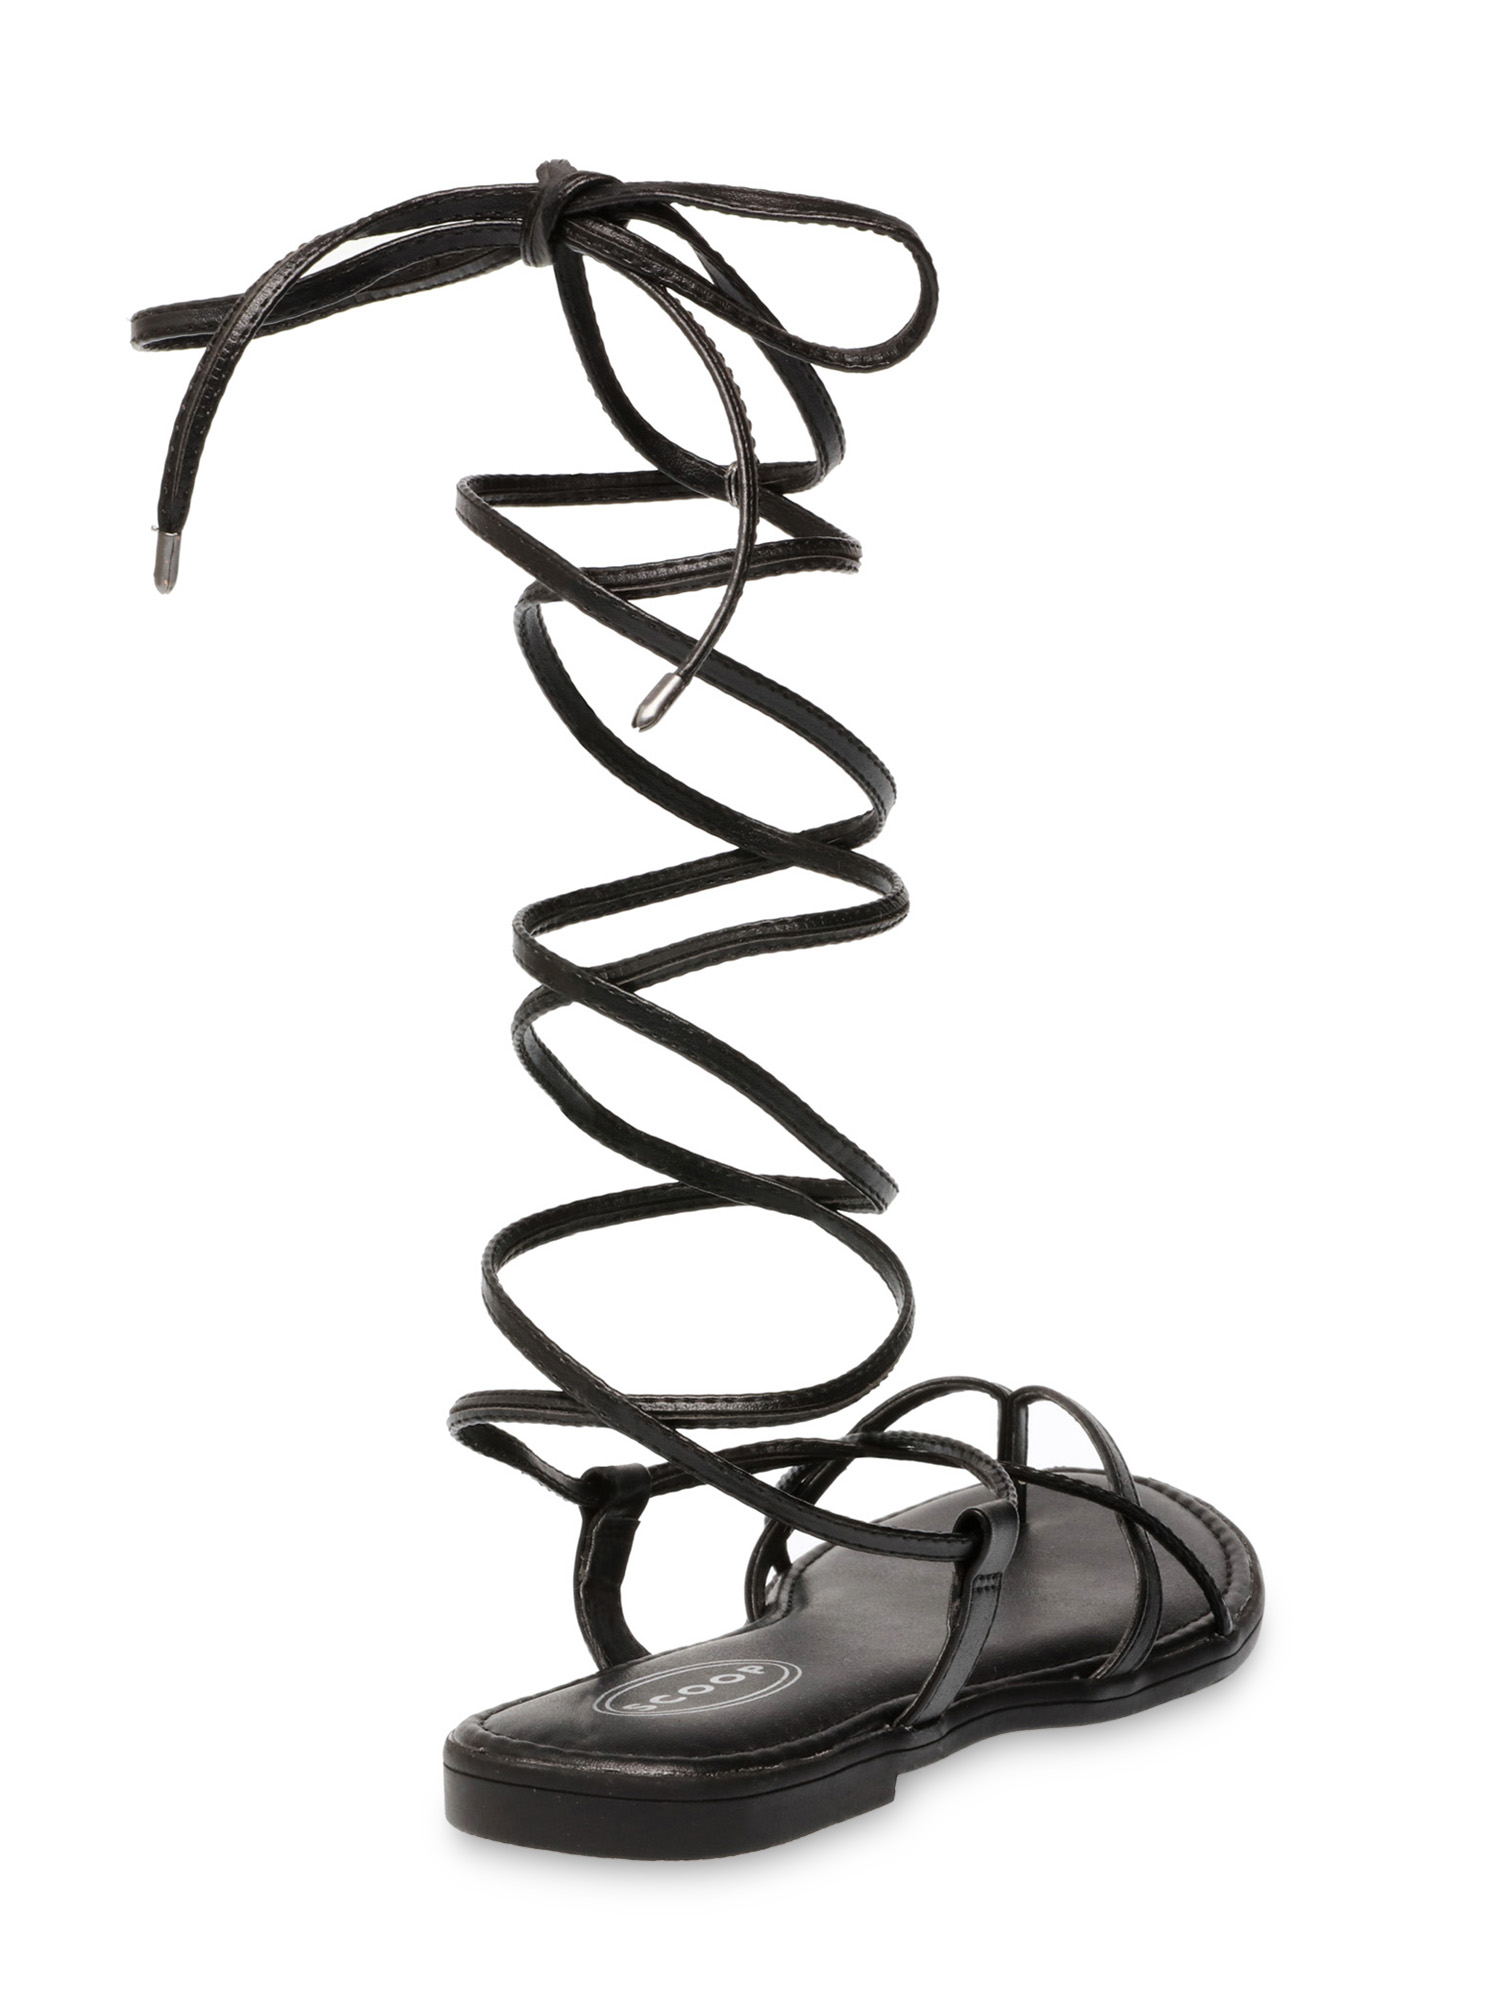 Scoop Women's Zoey Lace Up Thong Sandals - image 3 of 6